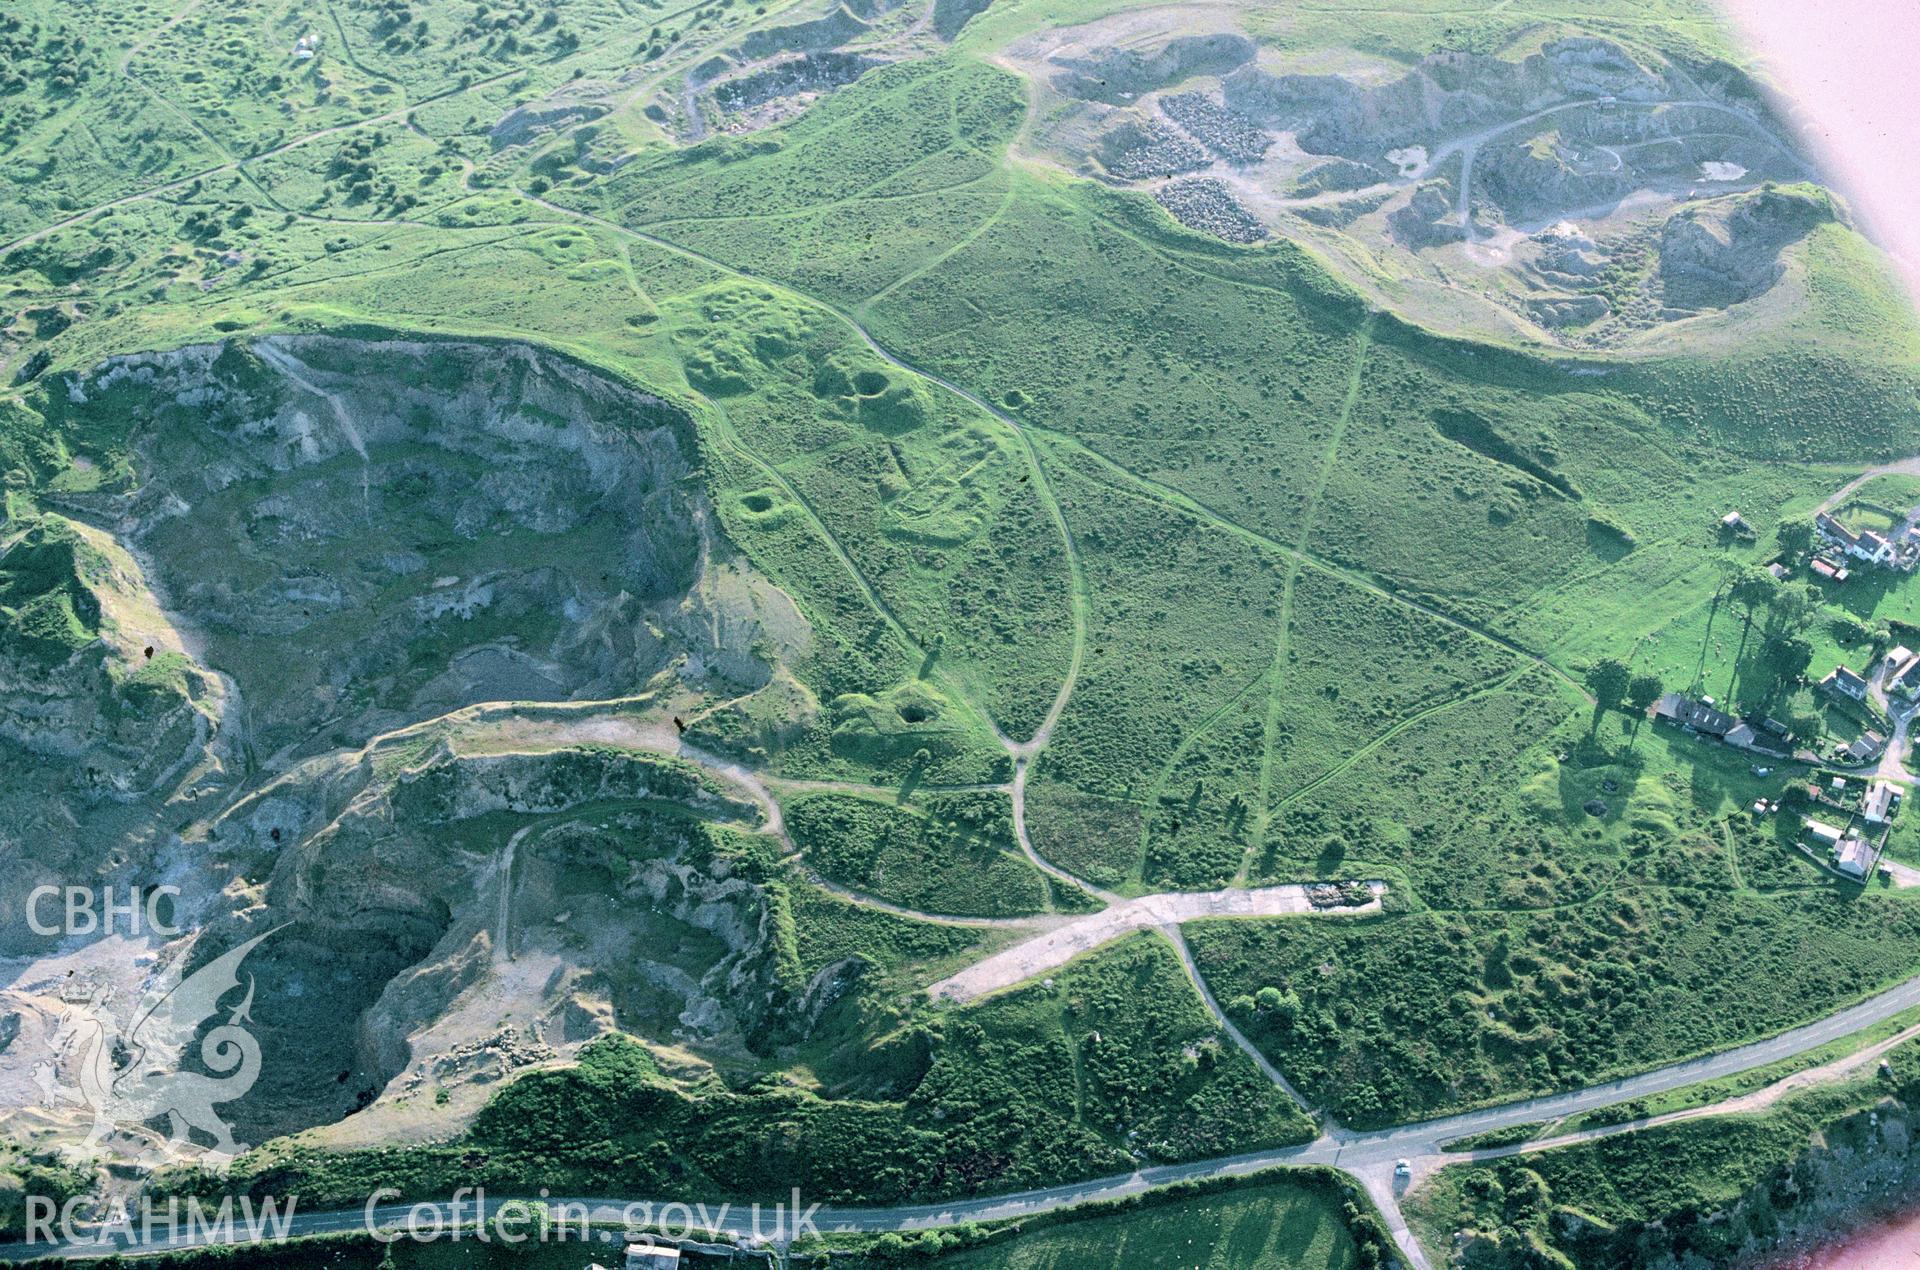 Slide of RCAHMW colour oblique aerial photograph of Pen Yr Henblas Lead Workings, taken by C.R. Musson, 23/6/1993.